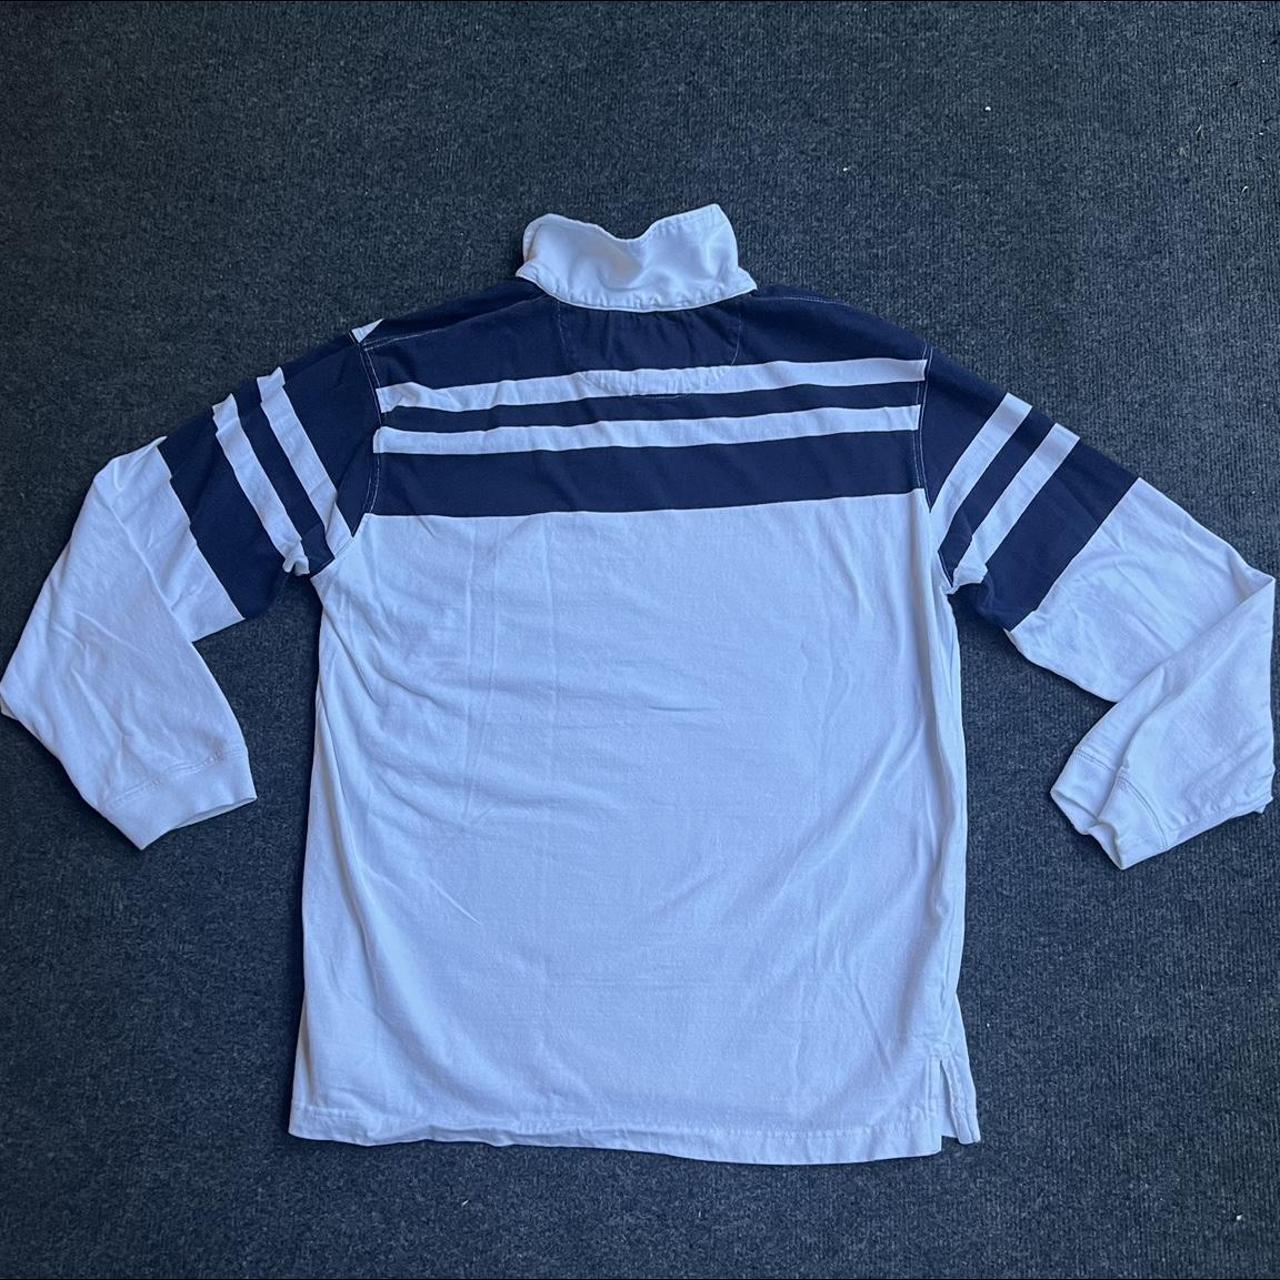 Steve & Barry's Men's Blue and White Polo-shirts | Depop